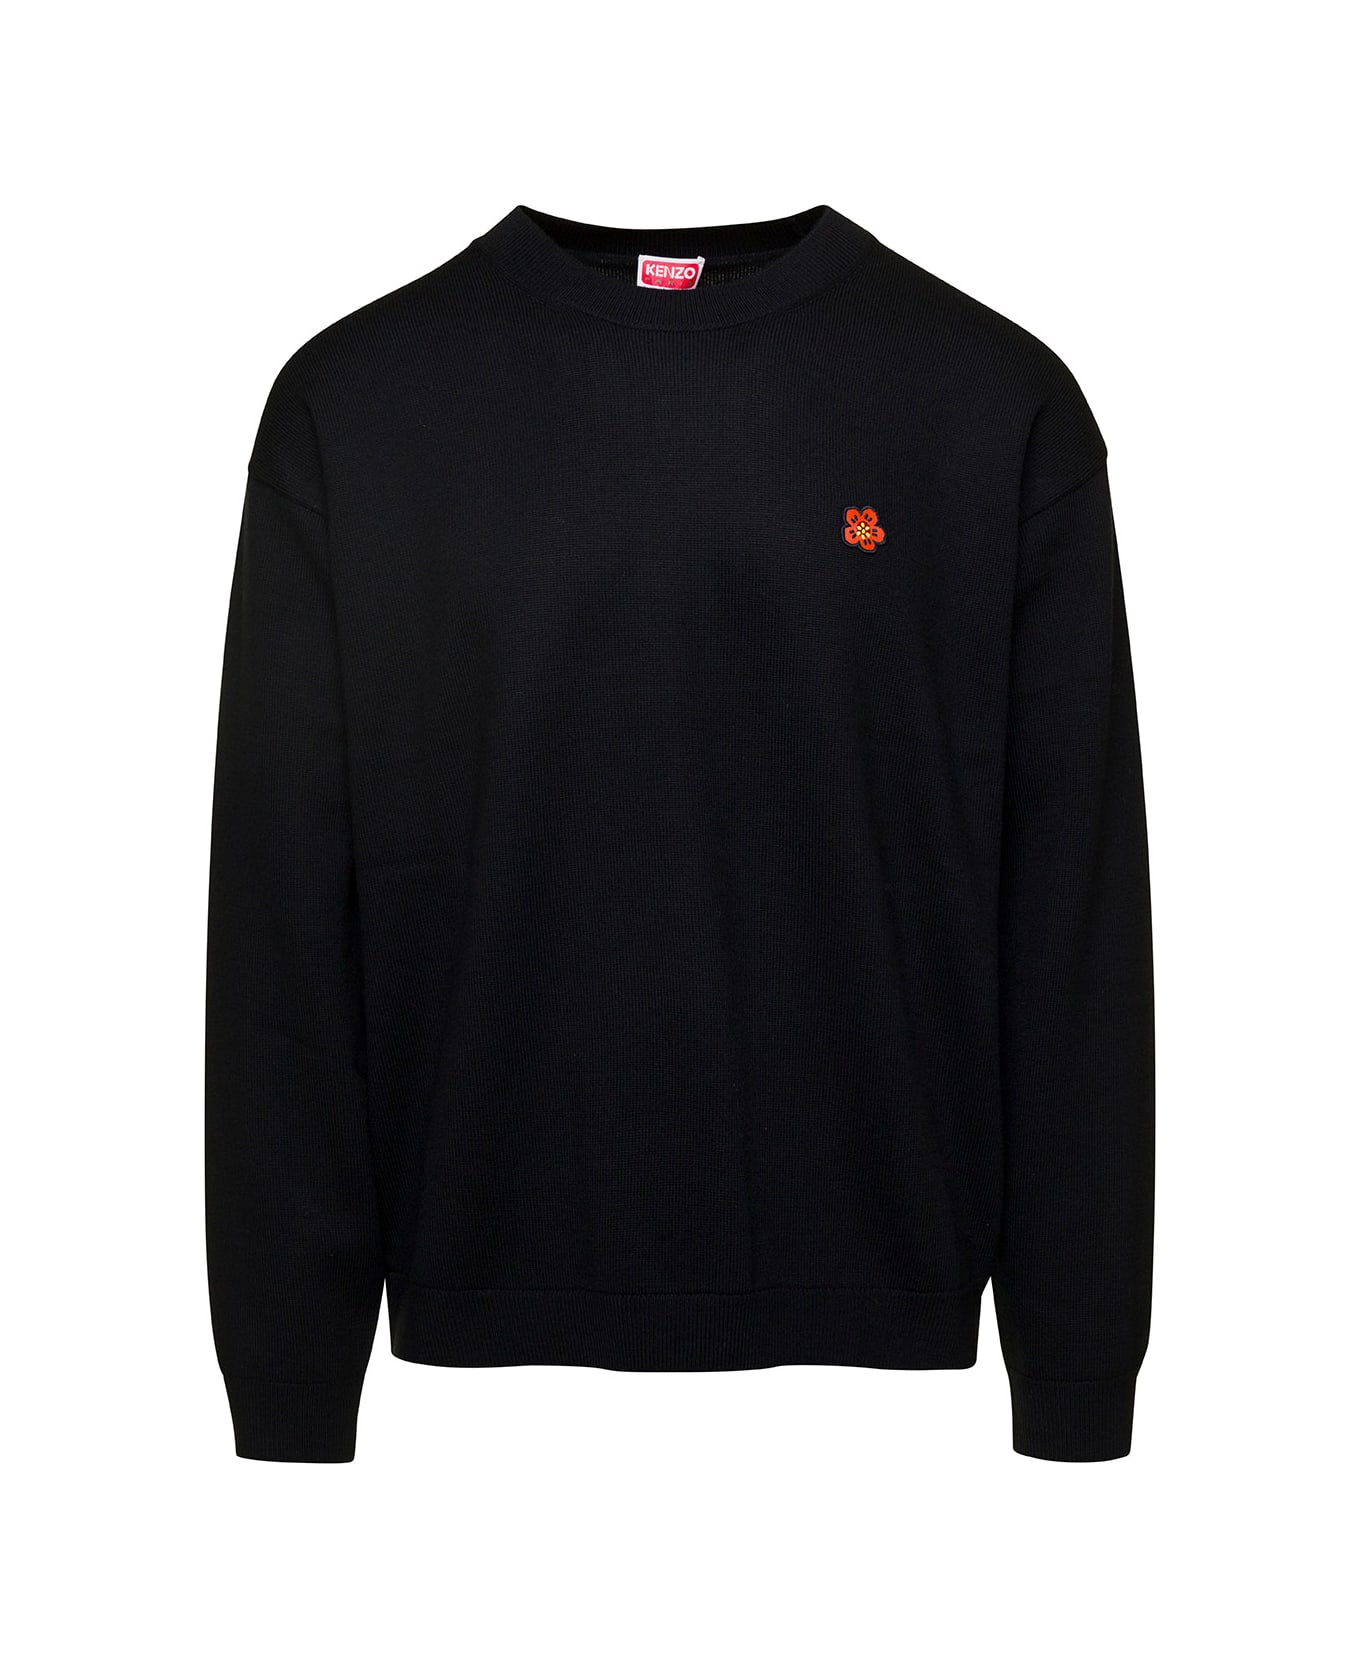 Kenzo Black Knit Jumper With Boke Flower Logo Patch On The Chest In Wool Man - Black